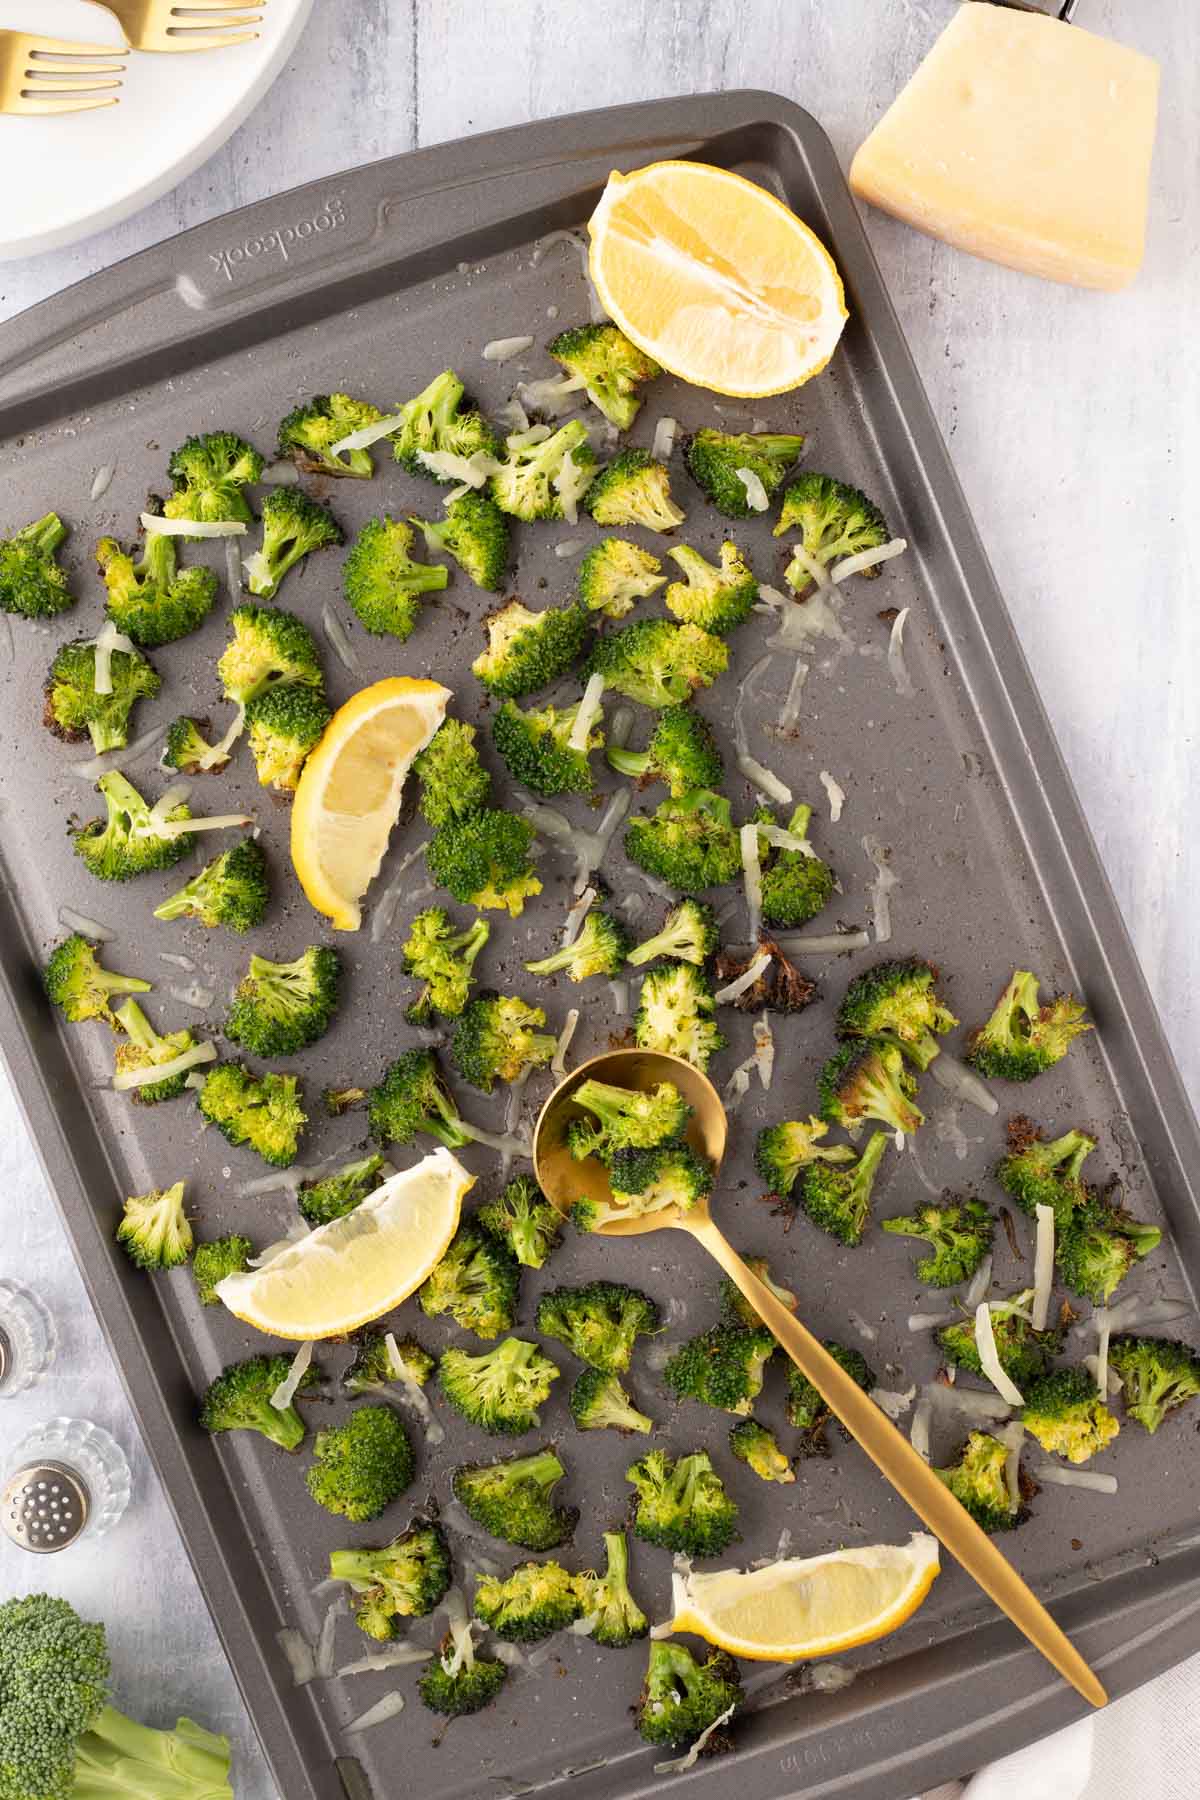 Roasted broccoli being served with a gold serving spoon from the baking sheet.